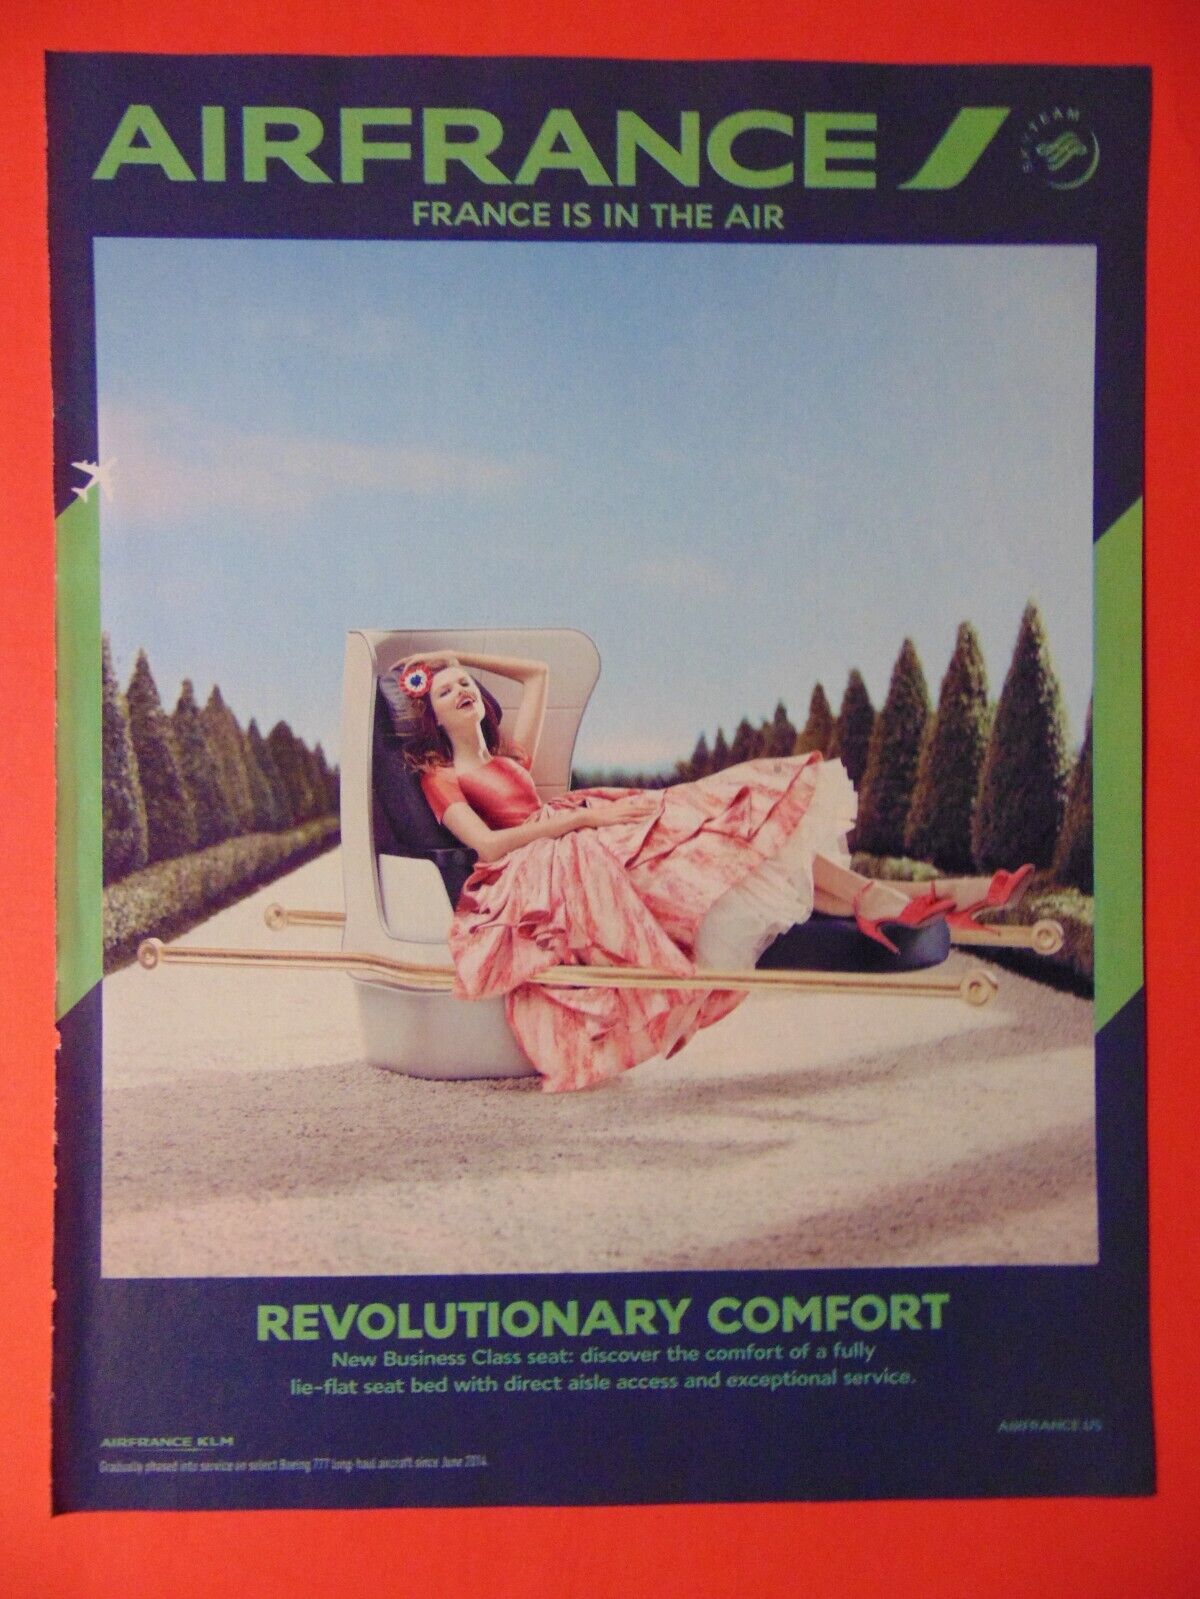 2015 AIR FRANCE France is in the Air Revolutionary Comfort  print ad